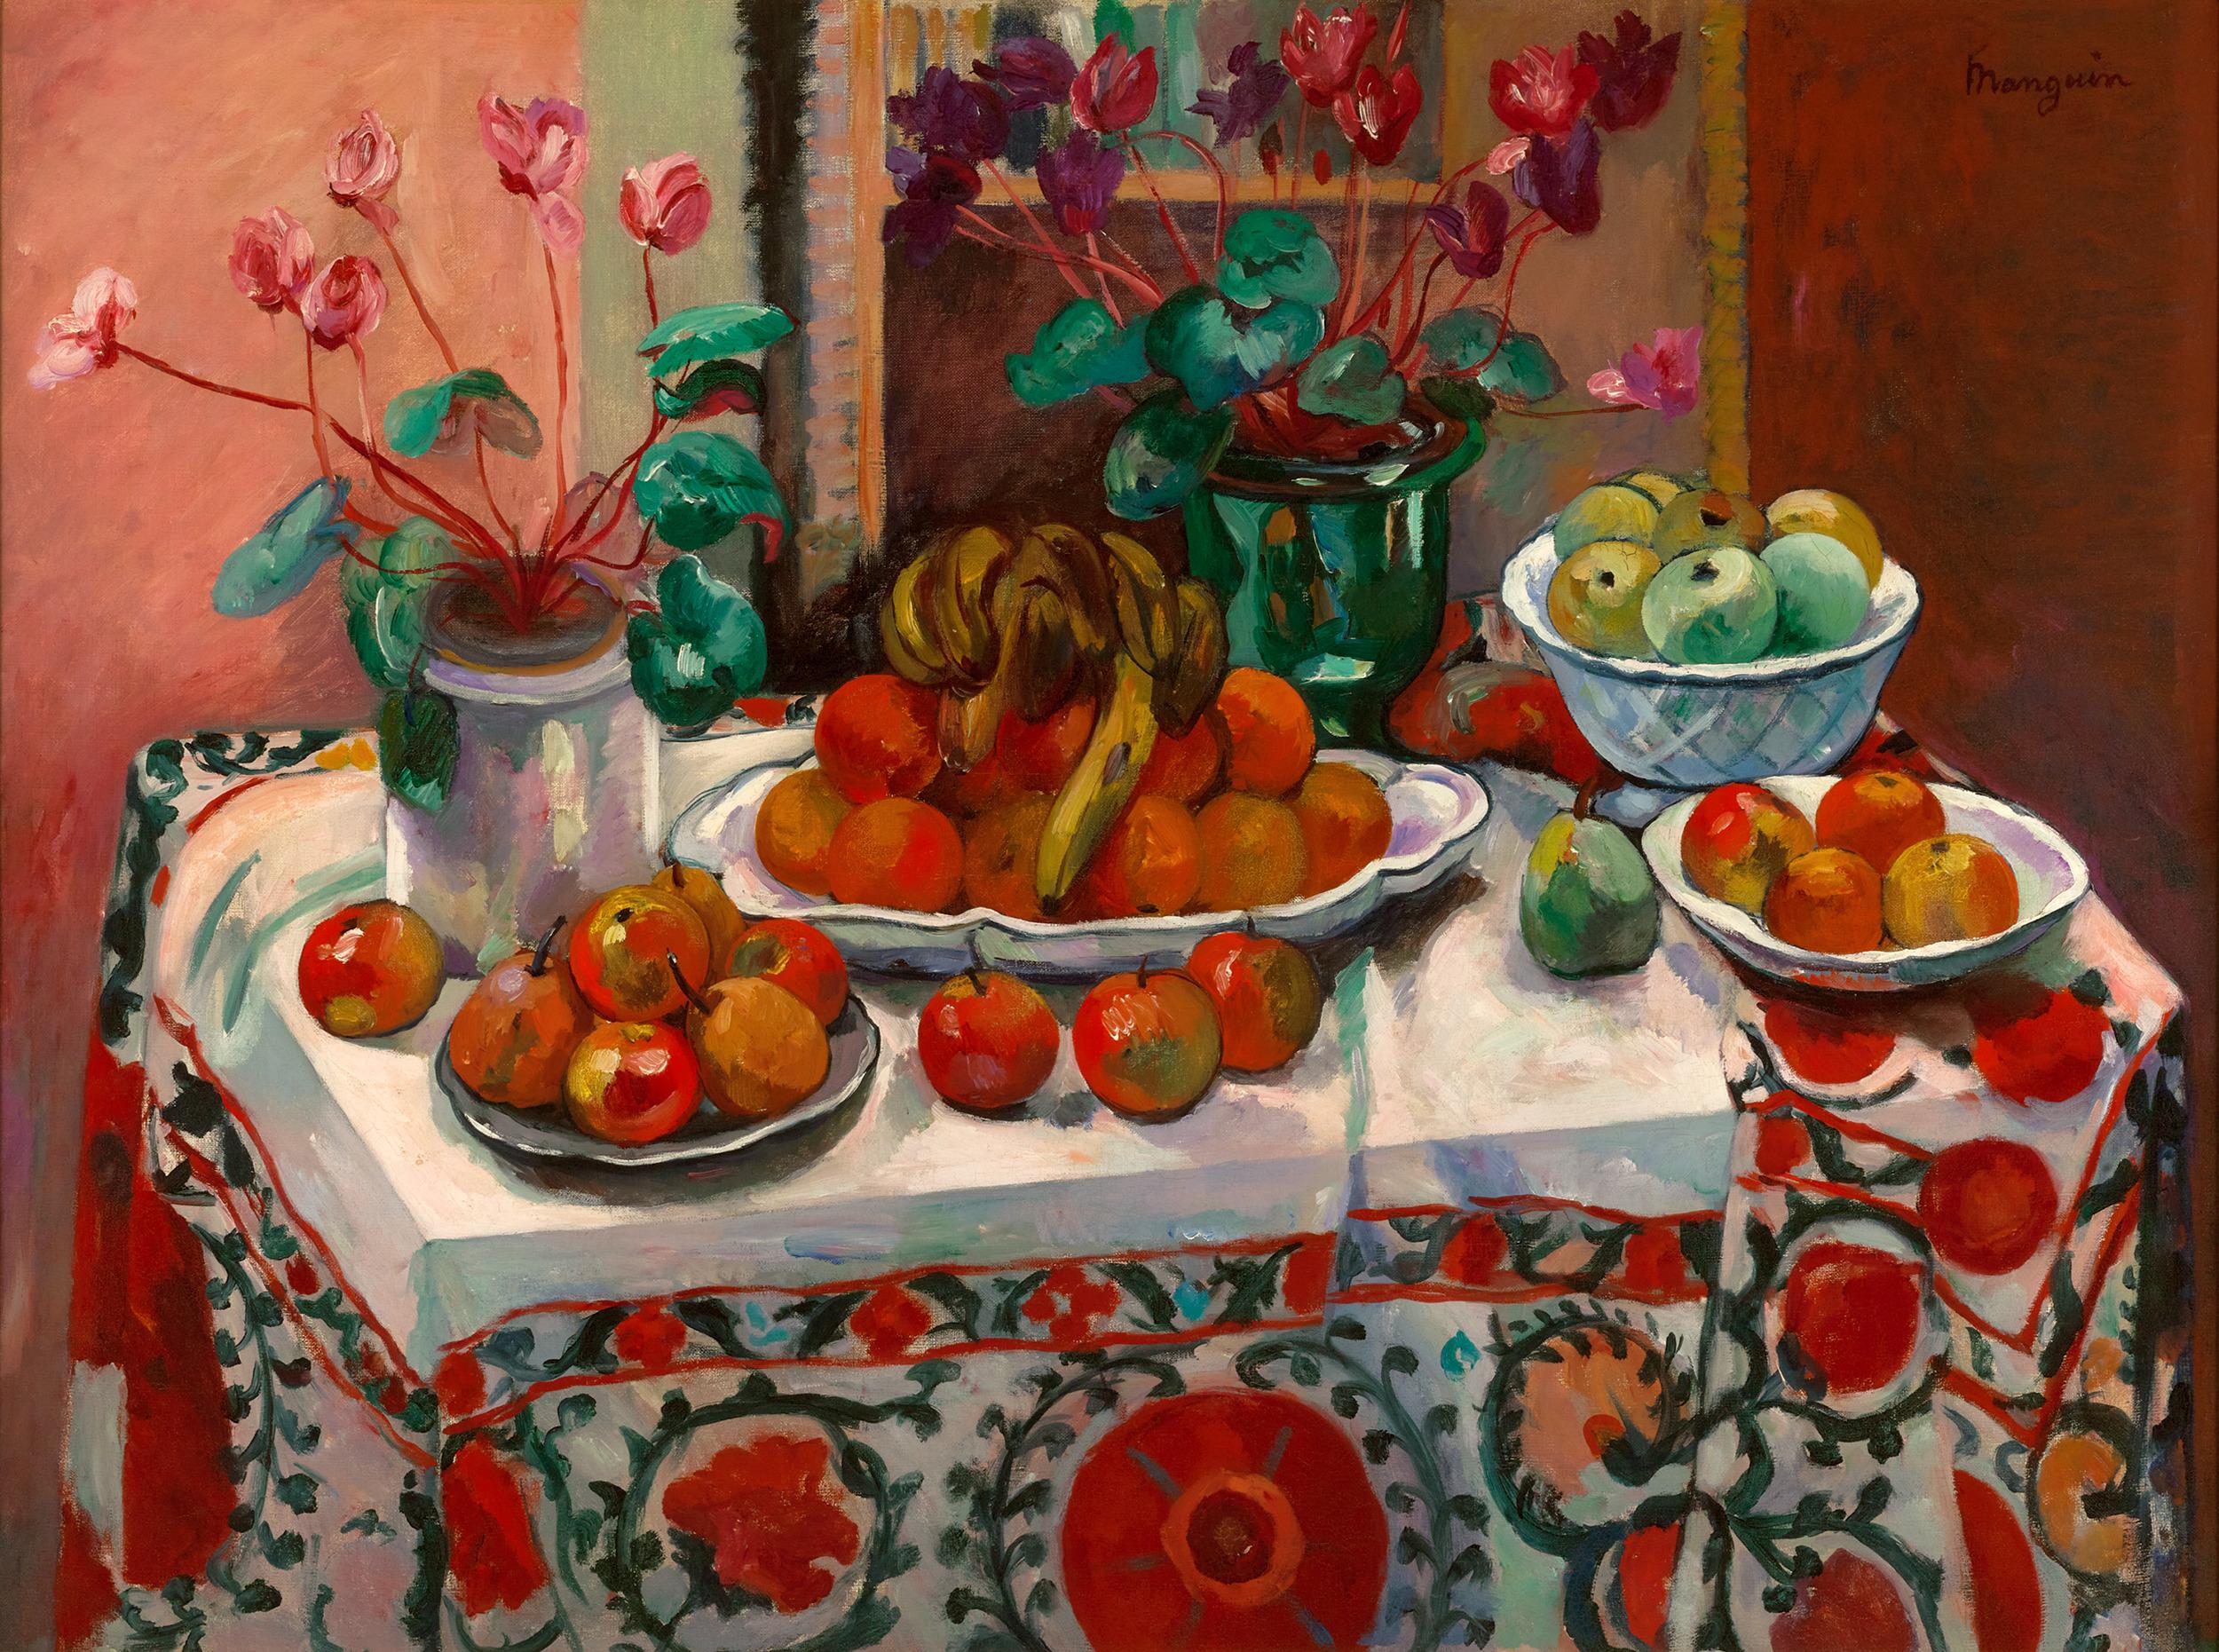 Henri Manguin
1874-1949  French

Nature morte aux cyclamens

Oil on canvas
Signed "Manguin" (upper right)

Brilliant color and expressive brushwork radiate from this Fauvist masterpiece by Henri Manguin entitled Nature morte aux cyclamens. Such a